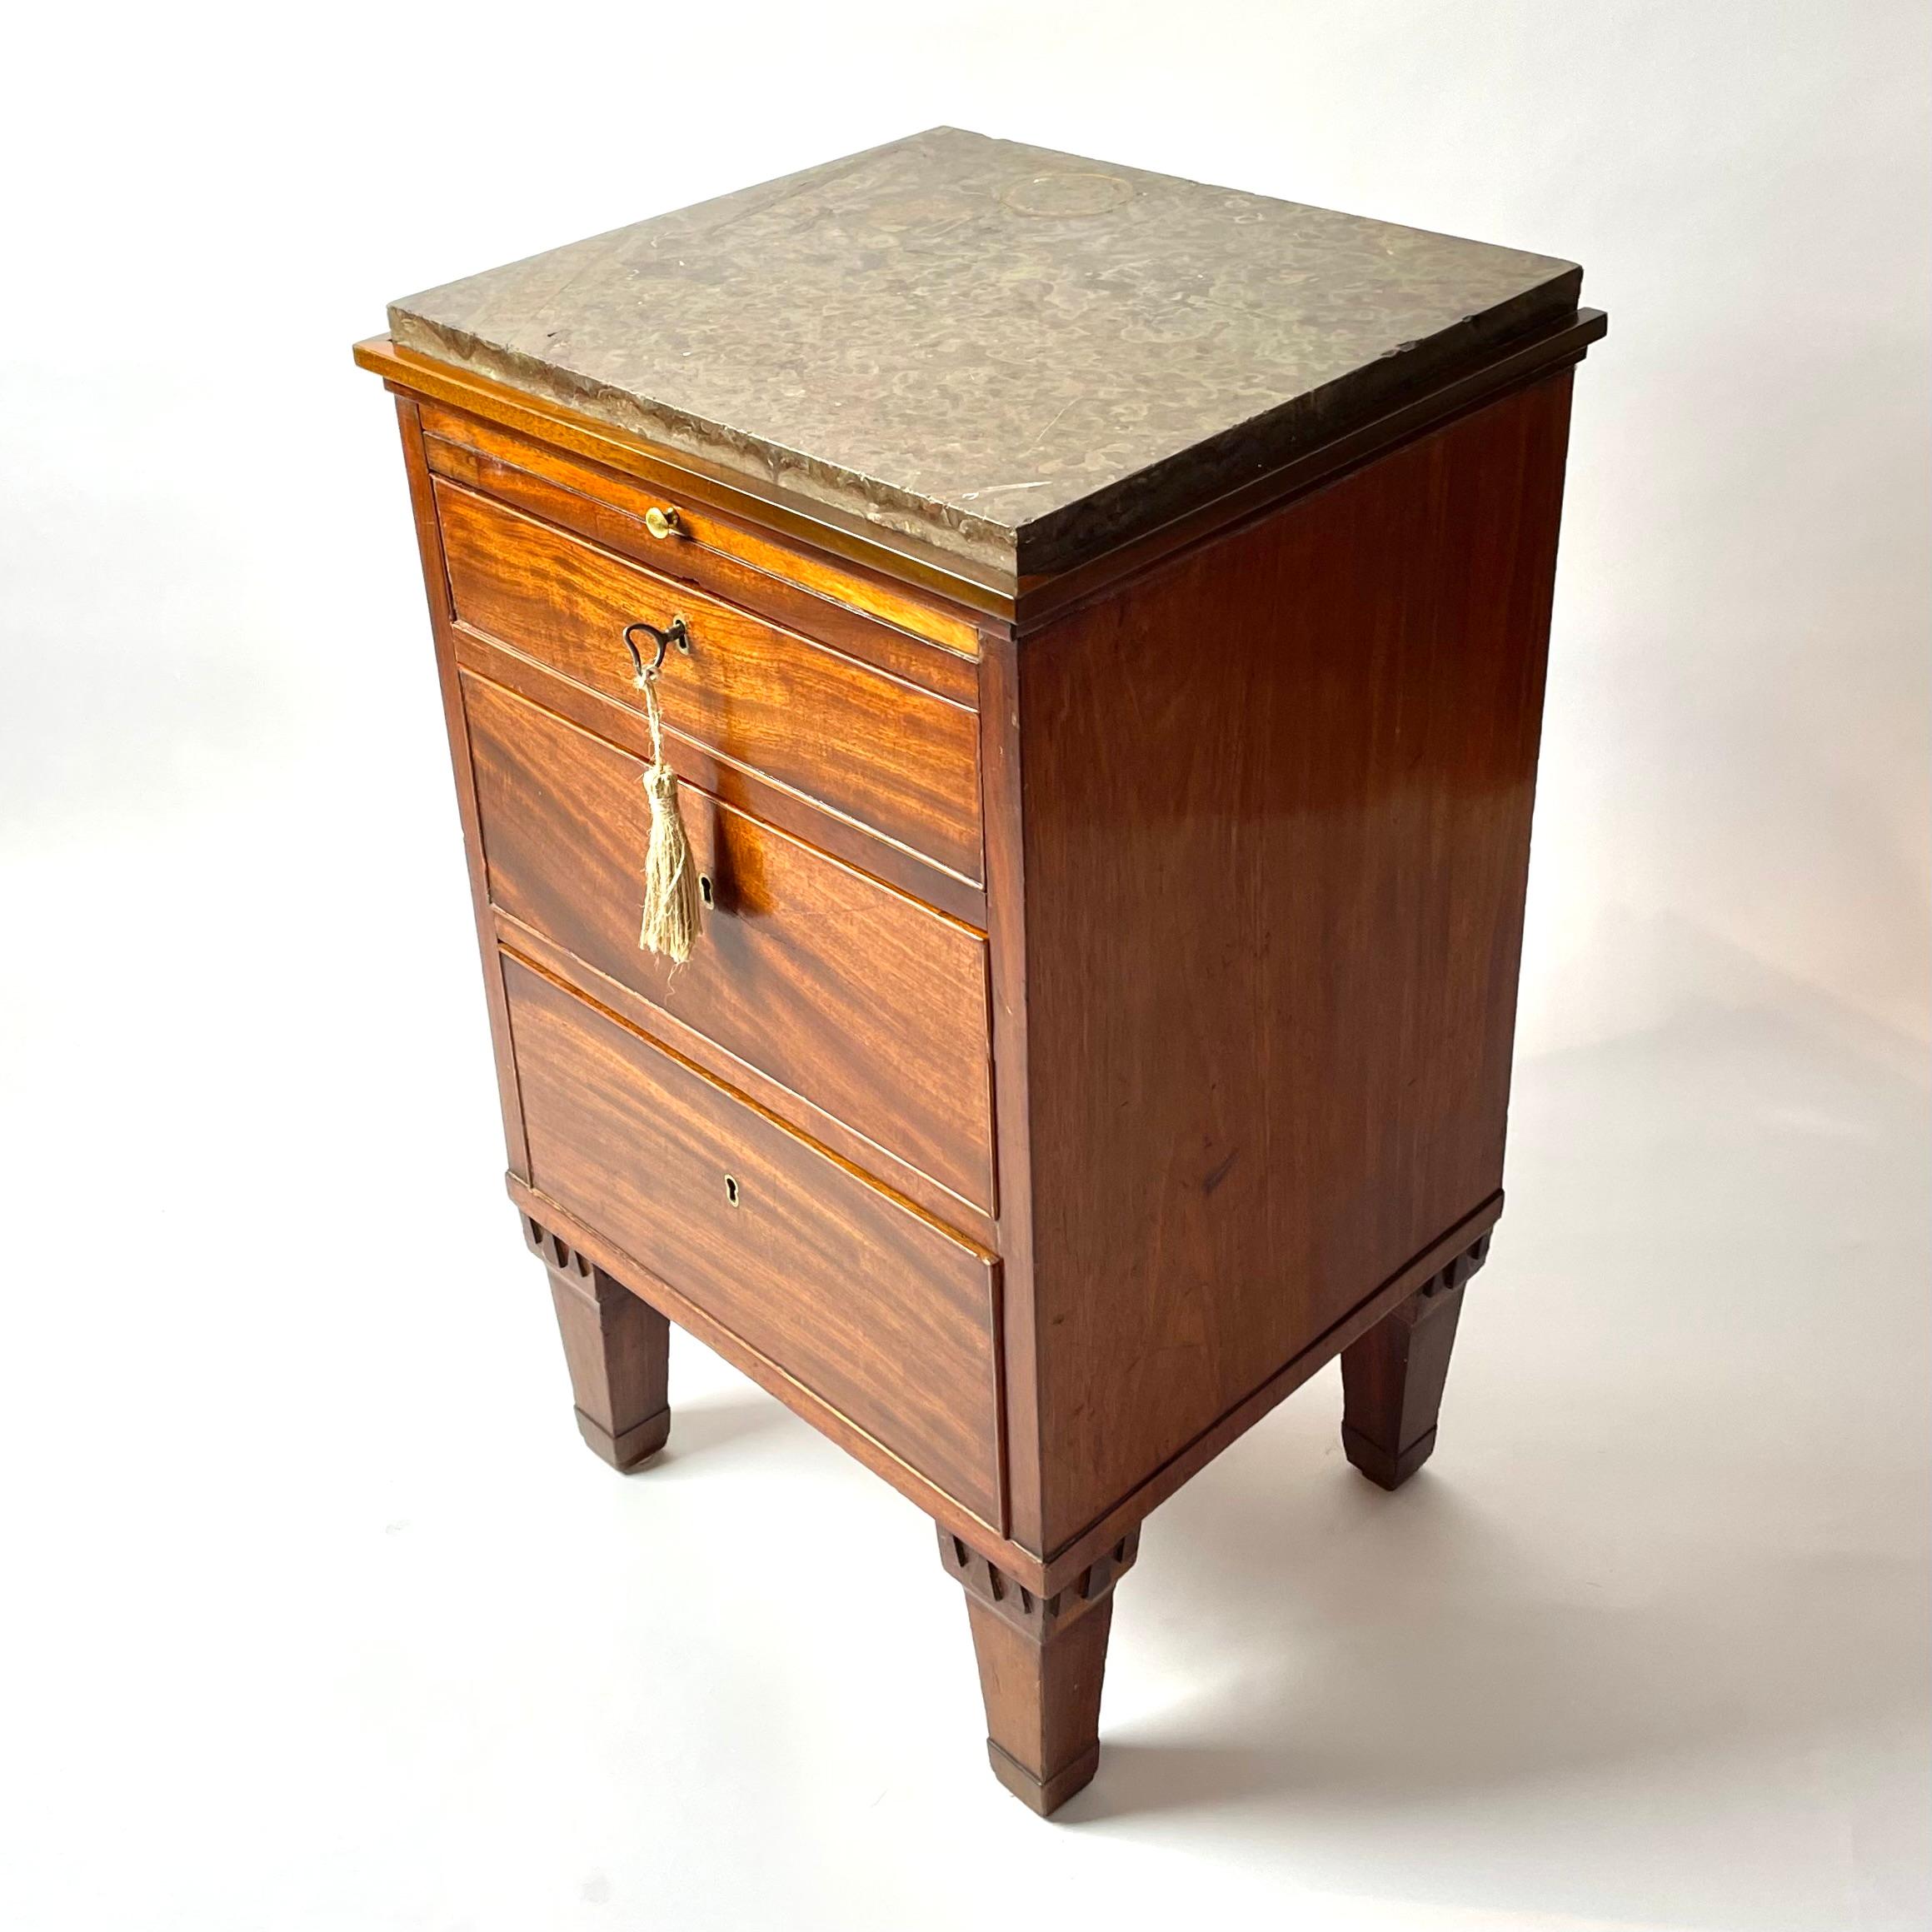 Very elegant and small Gustavian Chest of drawers in mahogany (Swietenia mahogoni) with Limestone top with a lot of Fossils. Made during the 1790s in Stockholm, Sweden. Unusual model with three drawers and a pull-out disc for writing. Beautiful